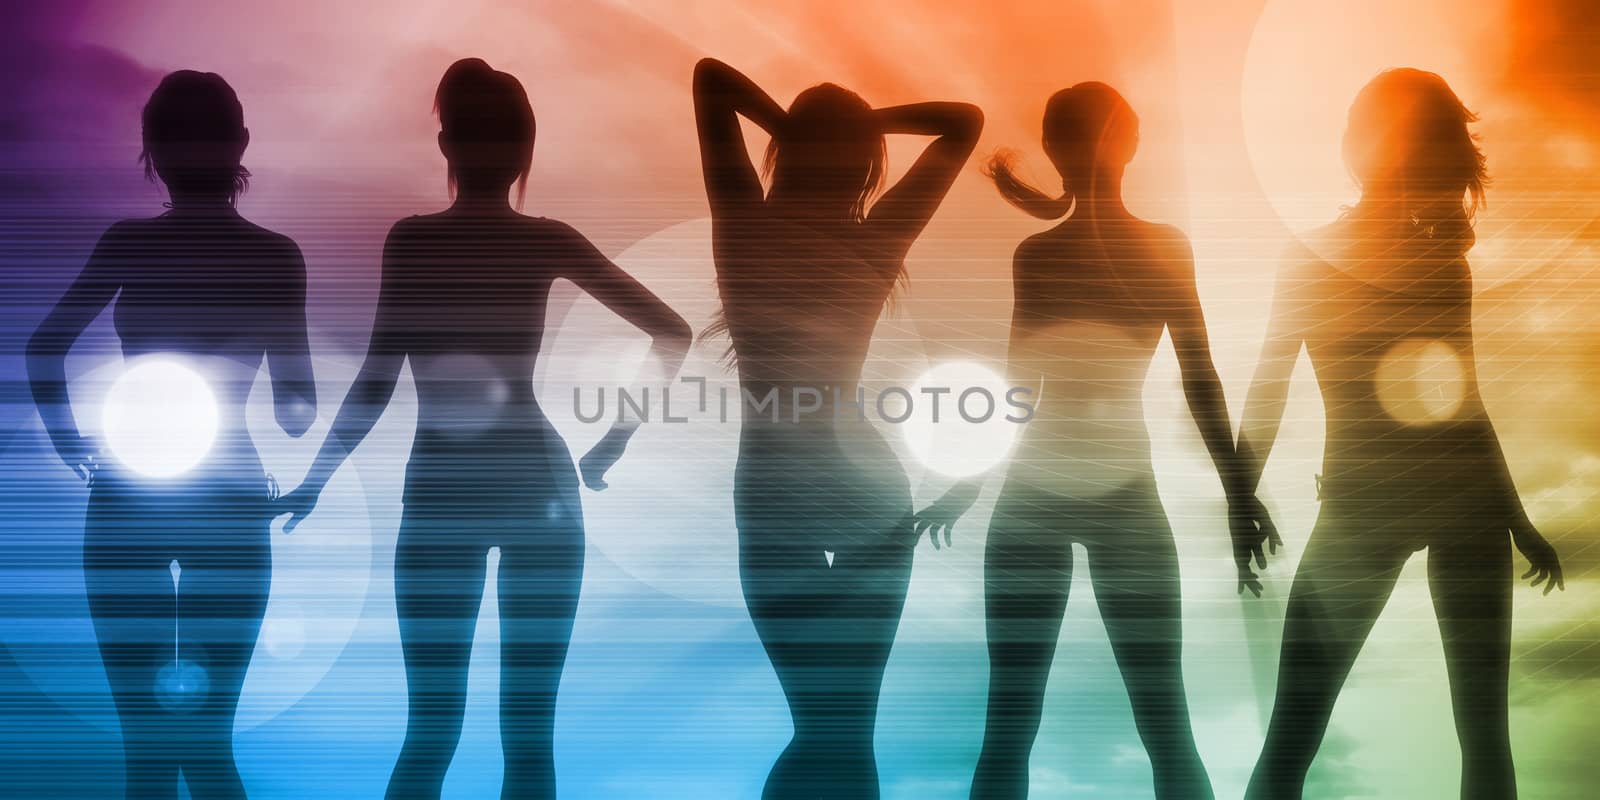 Disco Electronic Music Techno Party Background Art